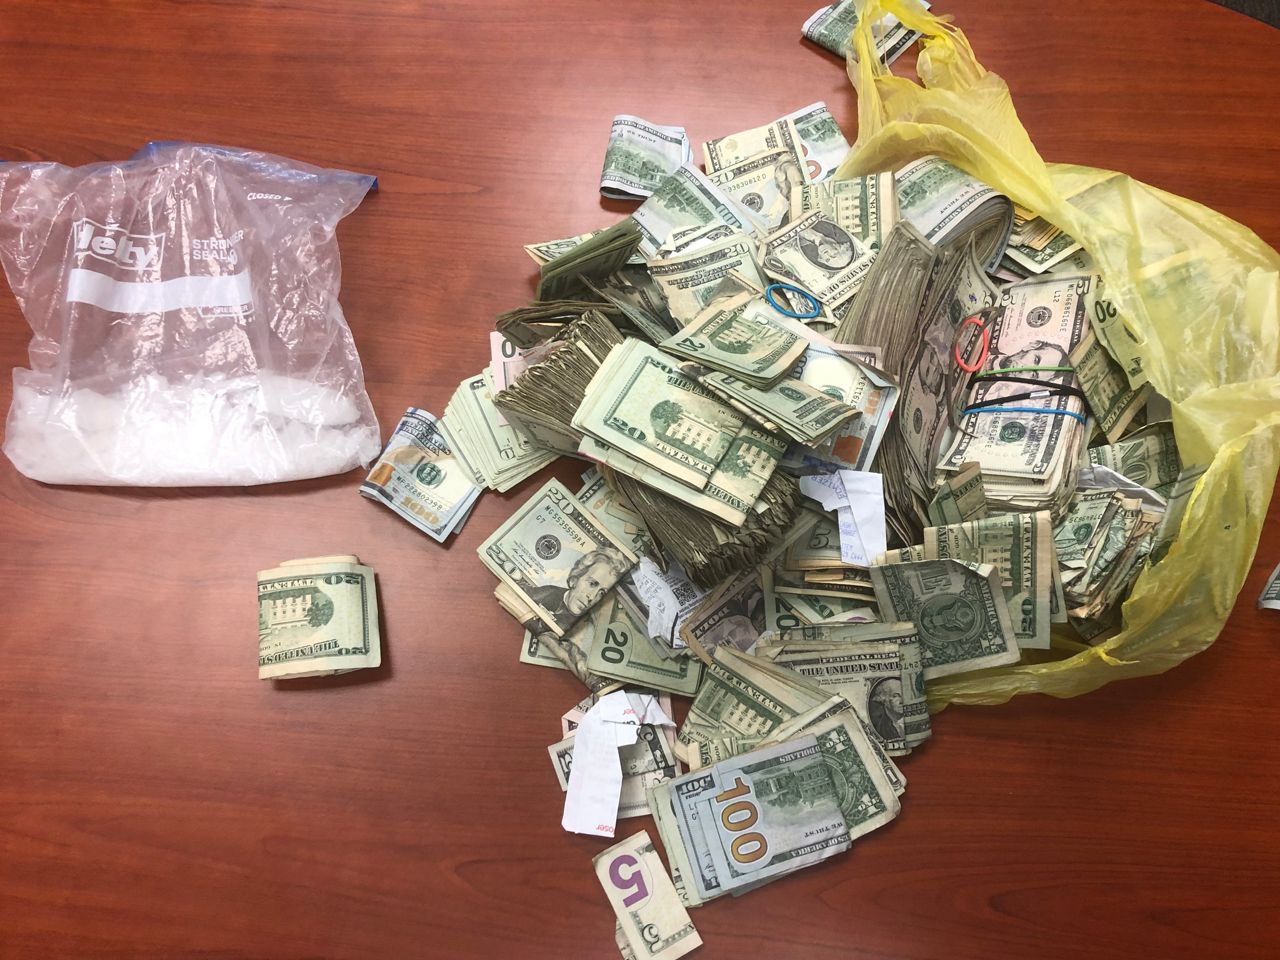 Over a dozen people have been arrested in connection to a seven-month-long drug investigation, which resulted in the bust of a major drug trafficking organization. (Courtesy of the Hillsborough County Sheriff's Office)